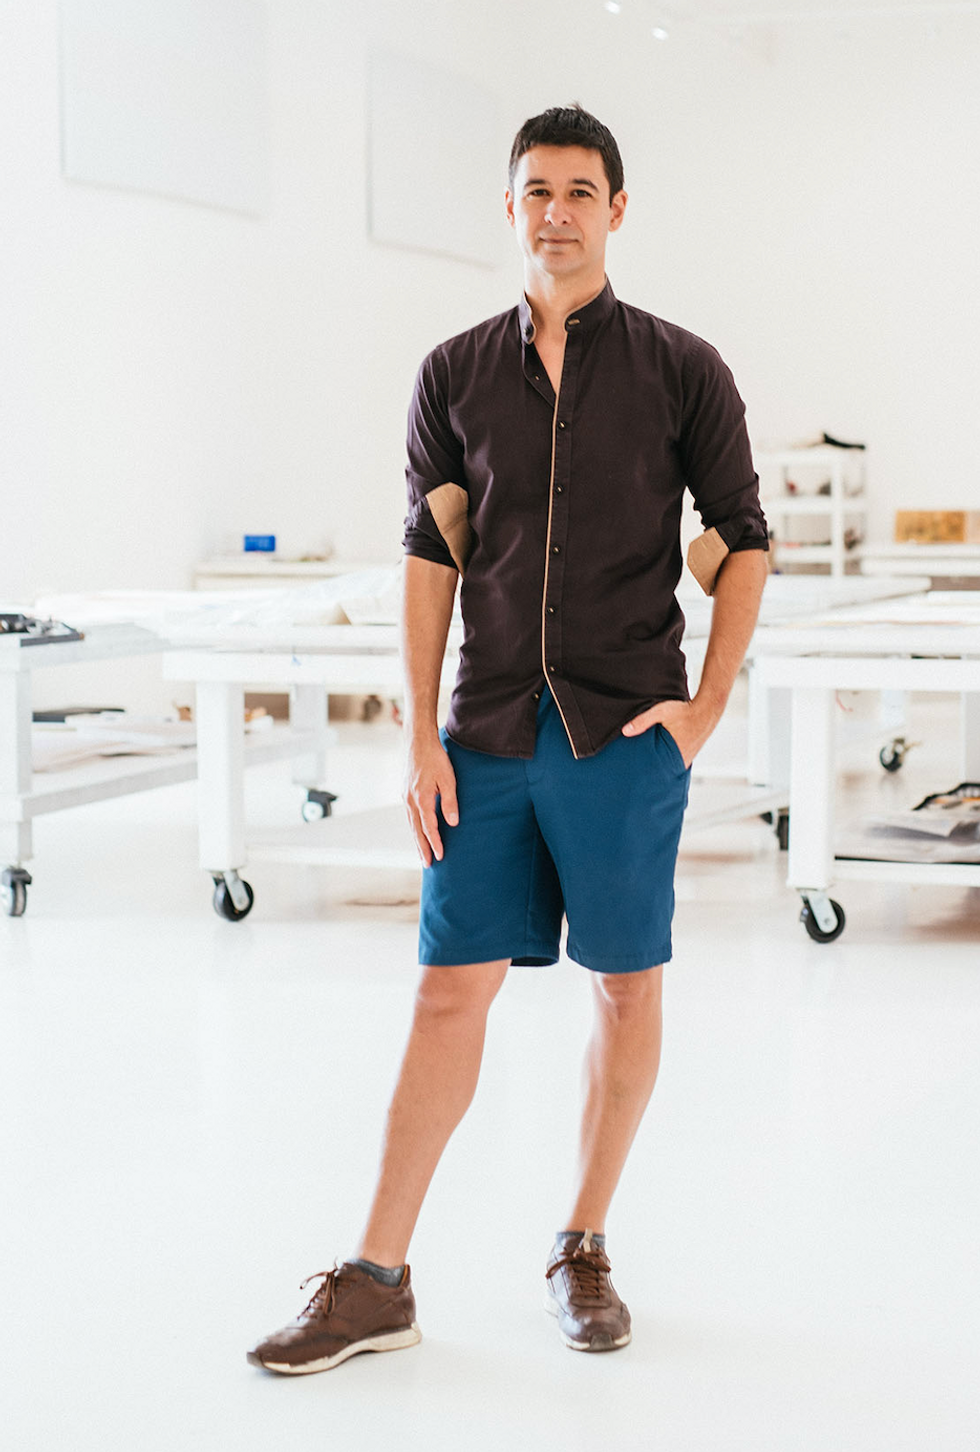 Jonah Bokaer, a brunette man, stands in shorts and long sleeves in front of white tables